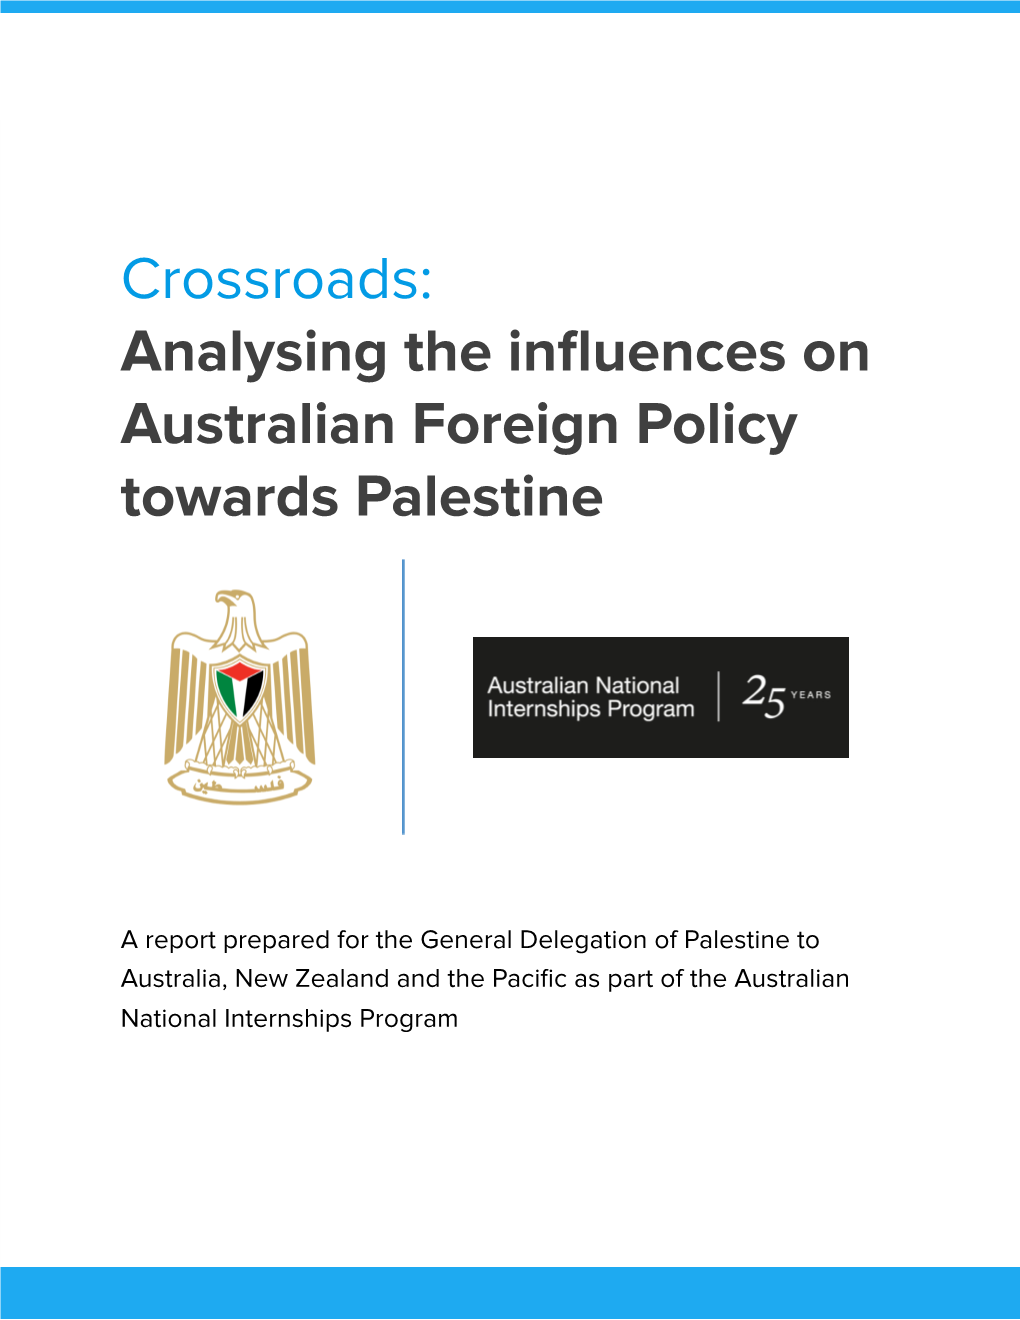 Crossroads: Analysing the Influences on Australian Foreign Policy